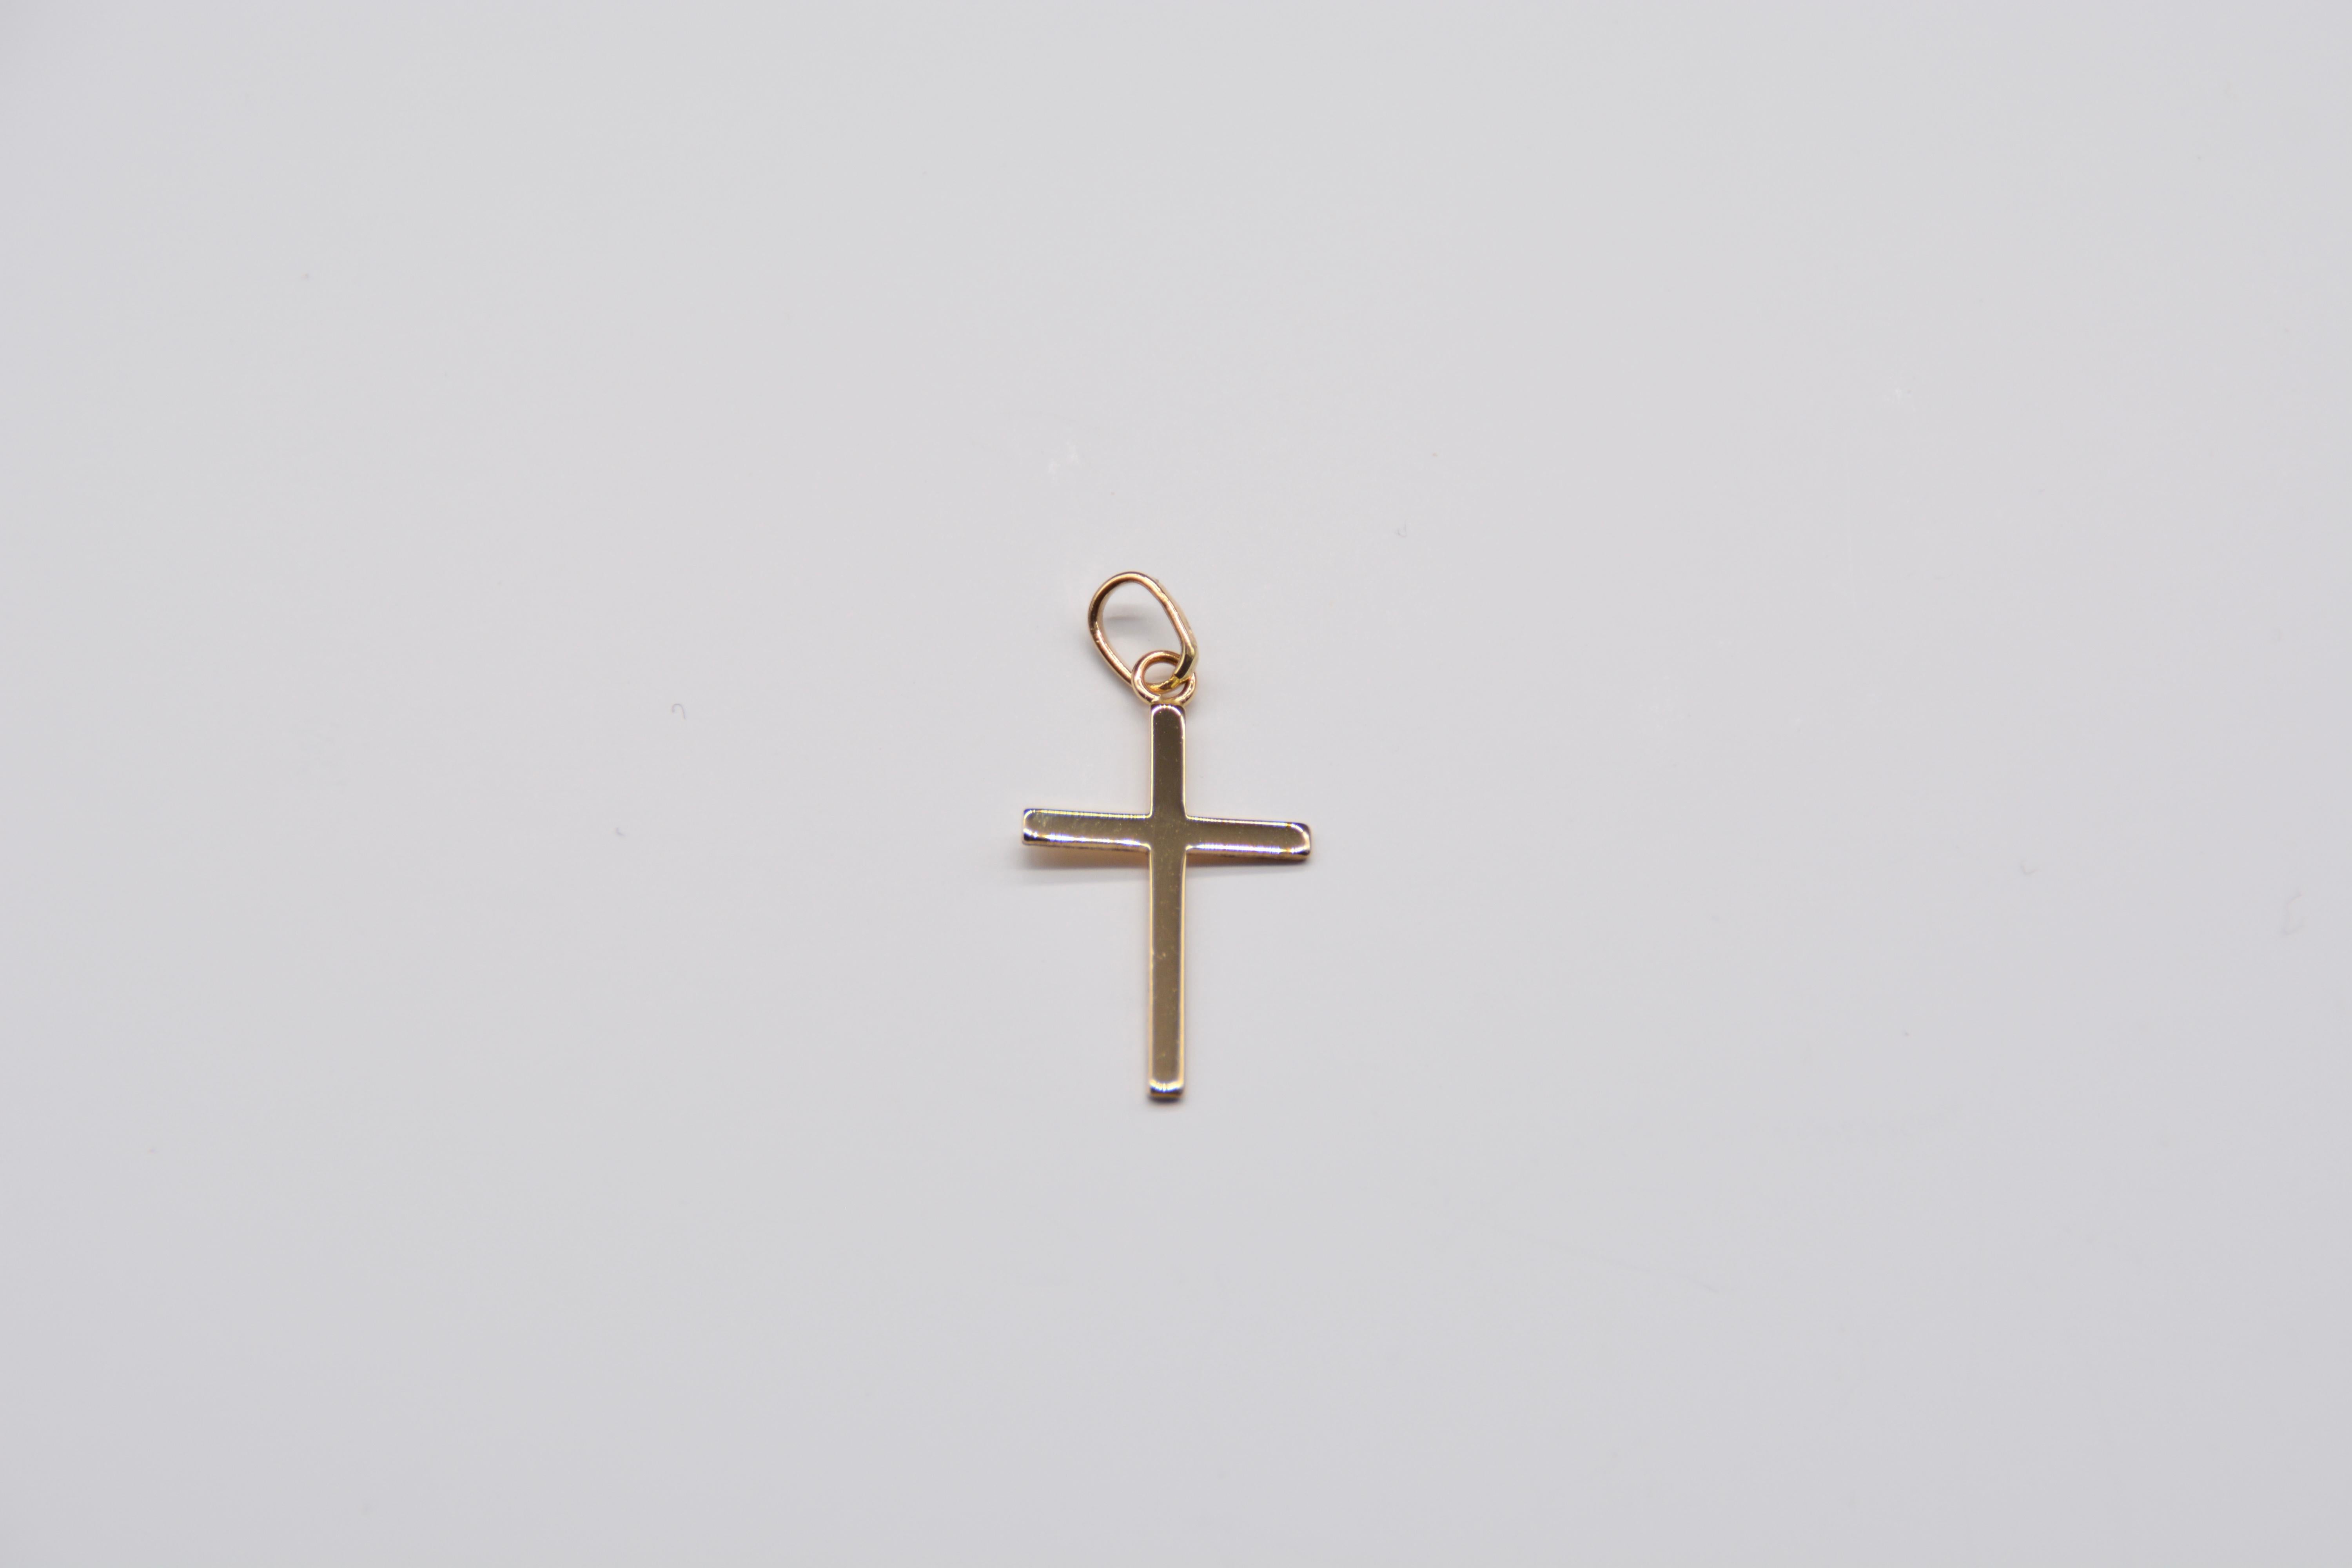 French Cross Pendant Gold Yellow Thin

This elegant French cross in 18 carat yellow gold is a perfect choice for religious events for the whole family. With its slim and delicate design, this cross can be worn by young and old, adding a touch of